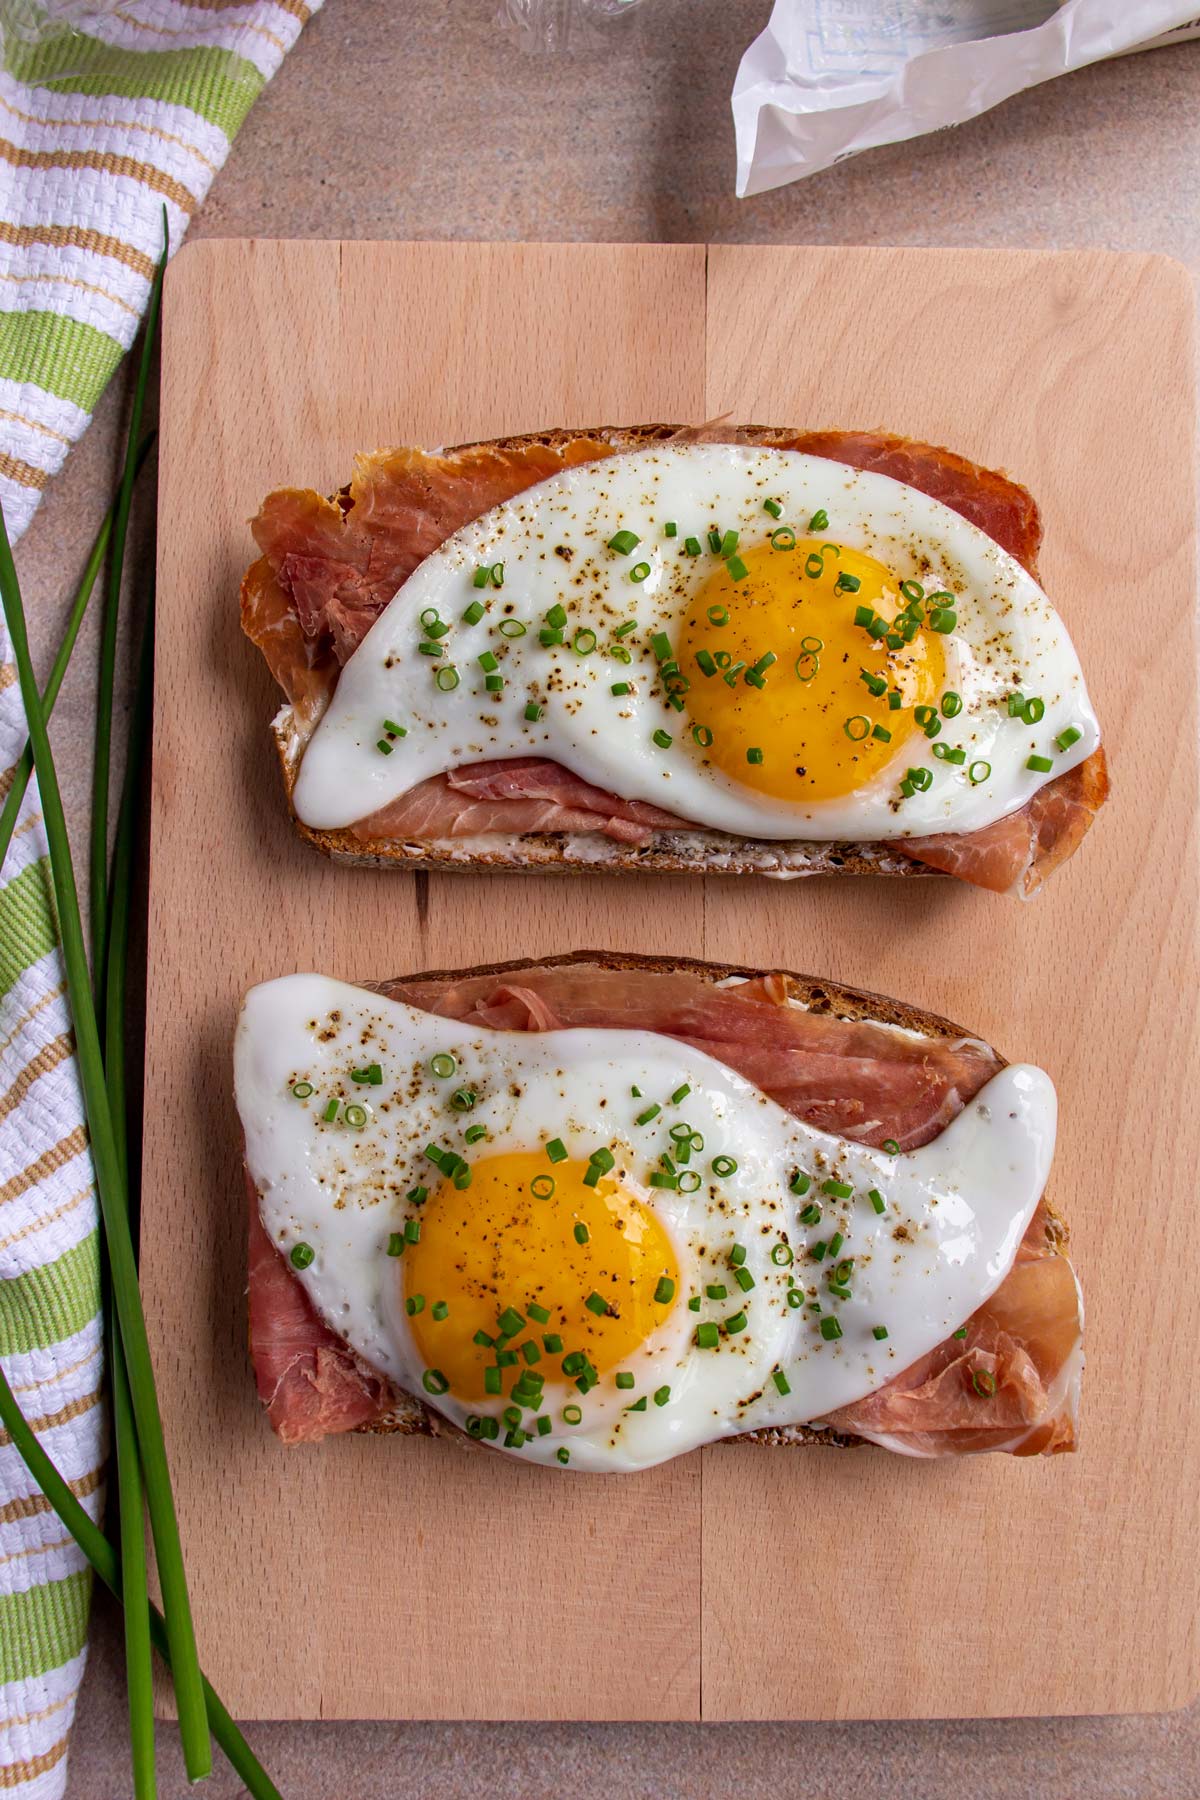 Two open-faced cured ham sandwiches with fried egg and chives on a wooden board.